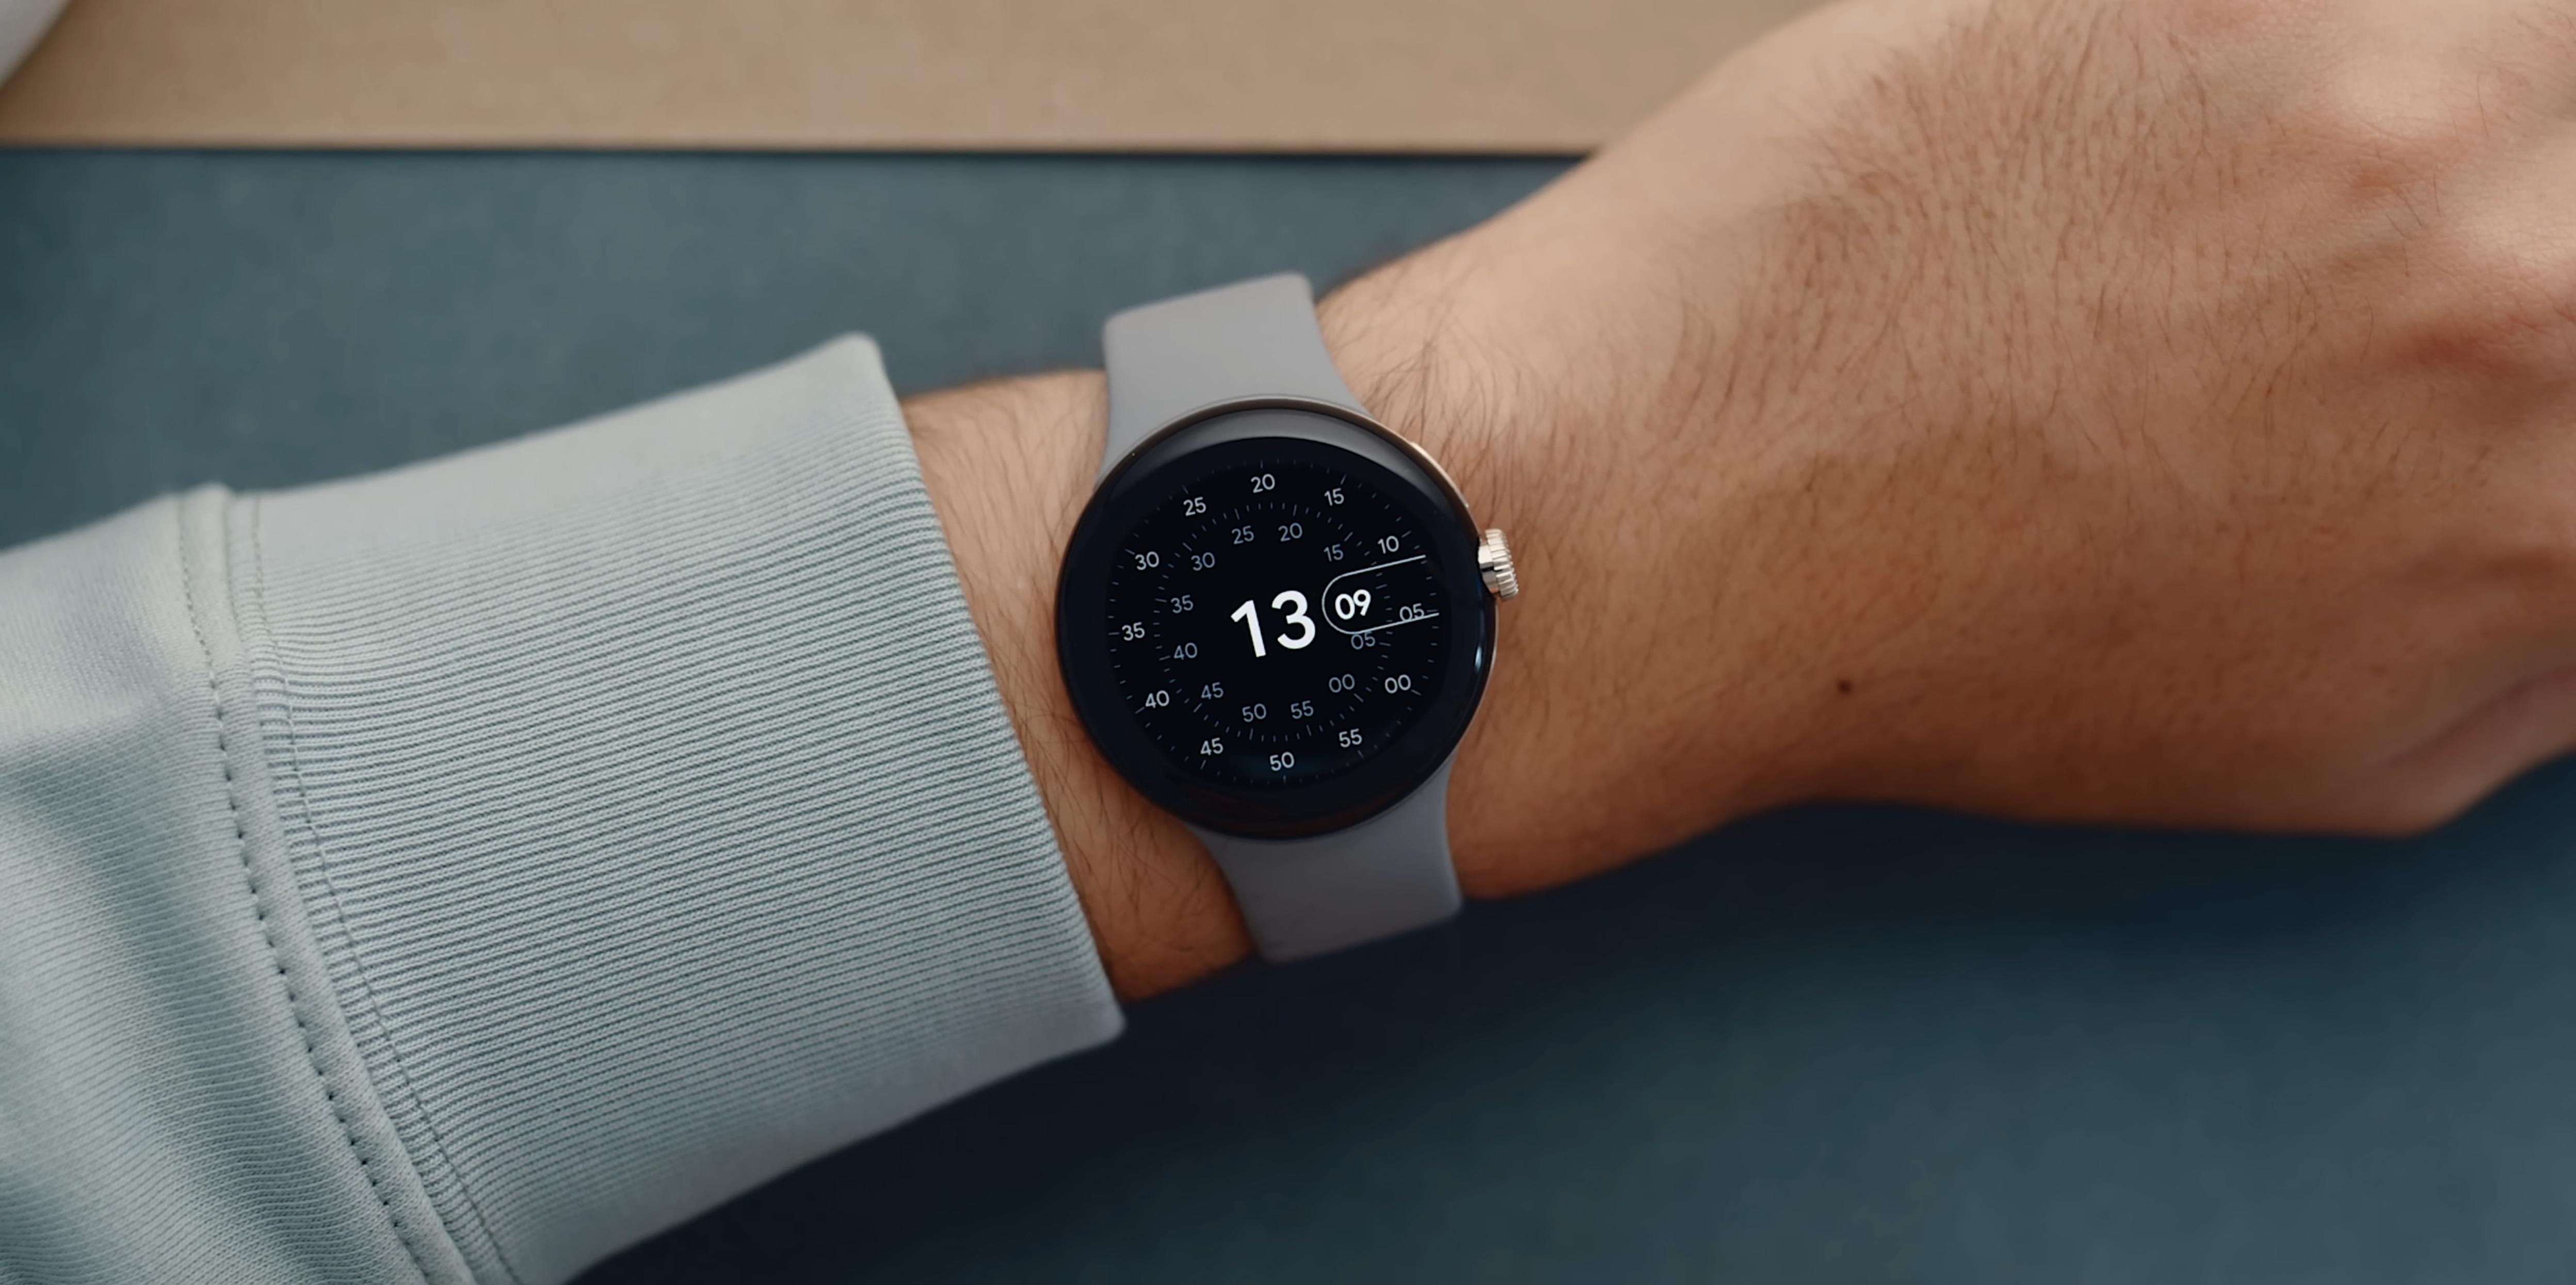 Google Pixel Watch with a gray band on someone's wrist